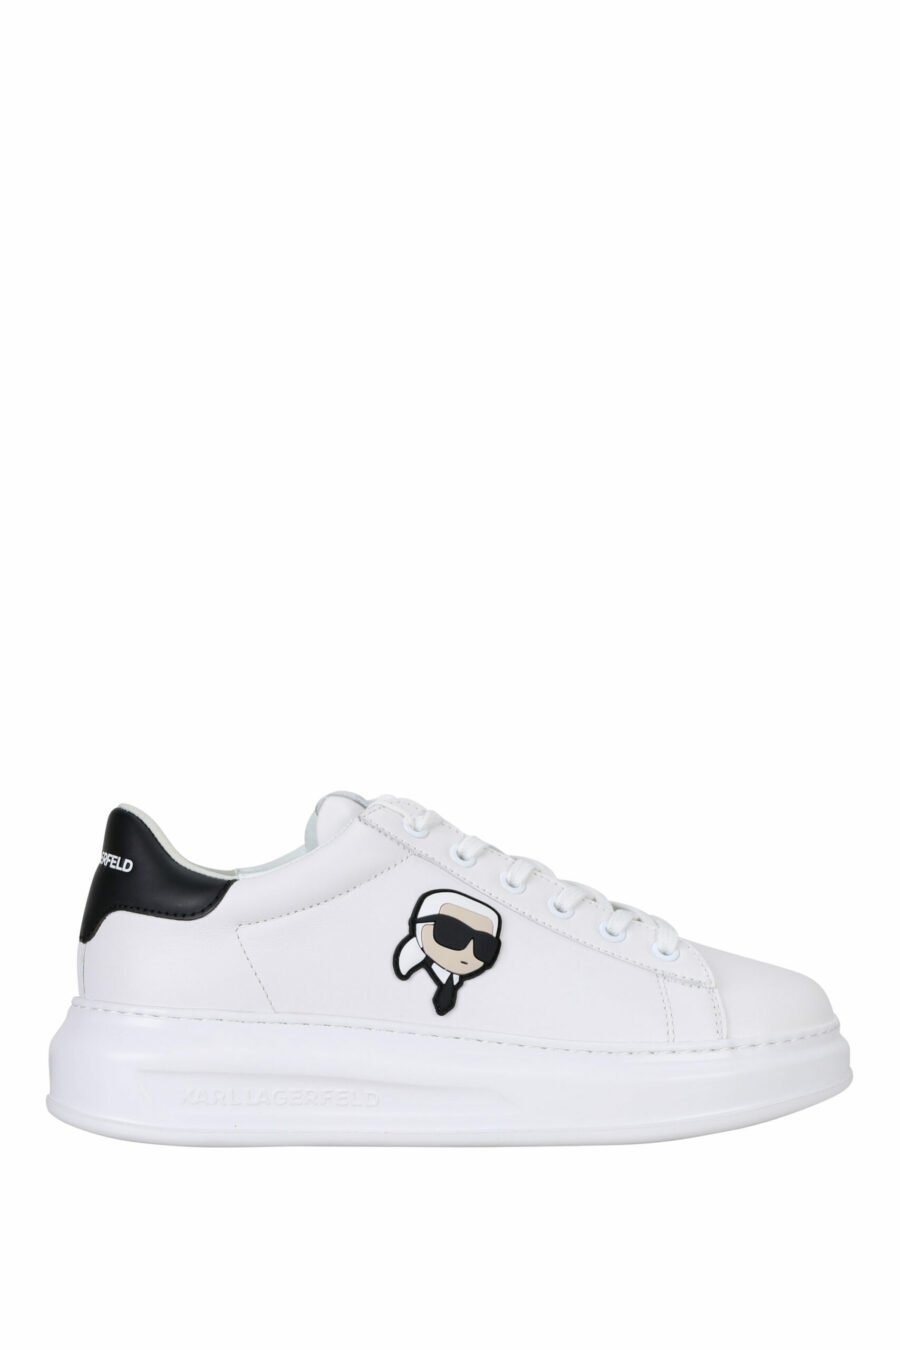 White leather trainers "kapri mens" with black detail and rubber "karl" minilogo - 5059529362347 scaled